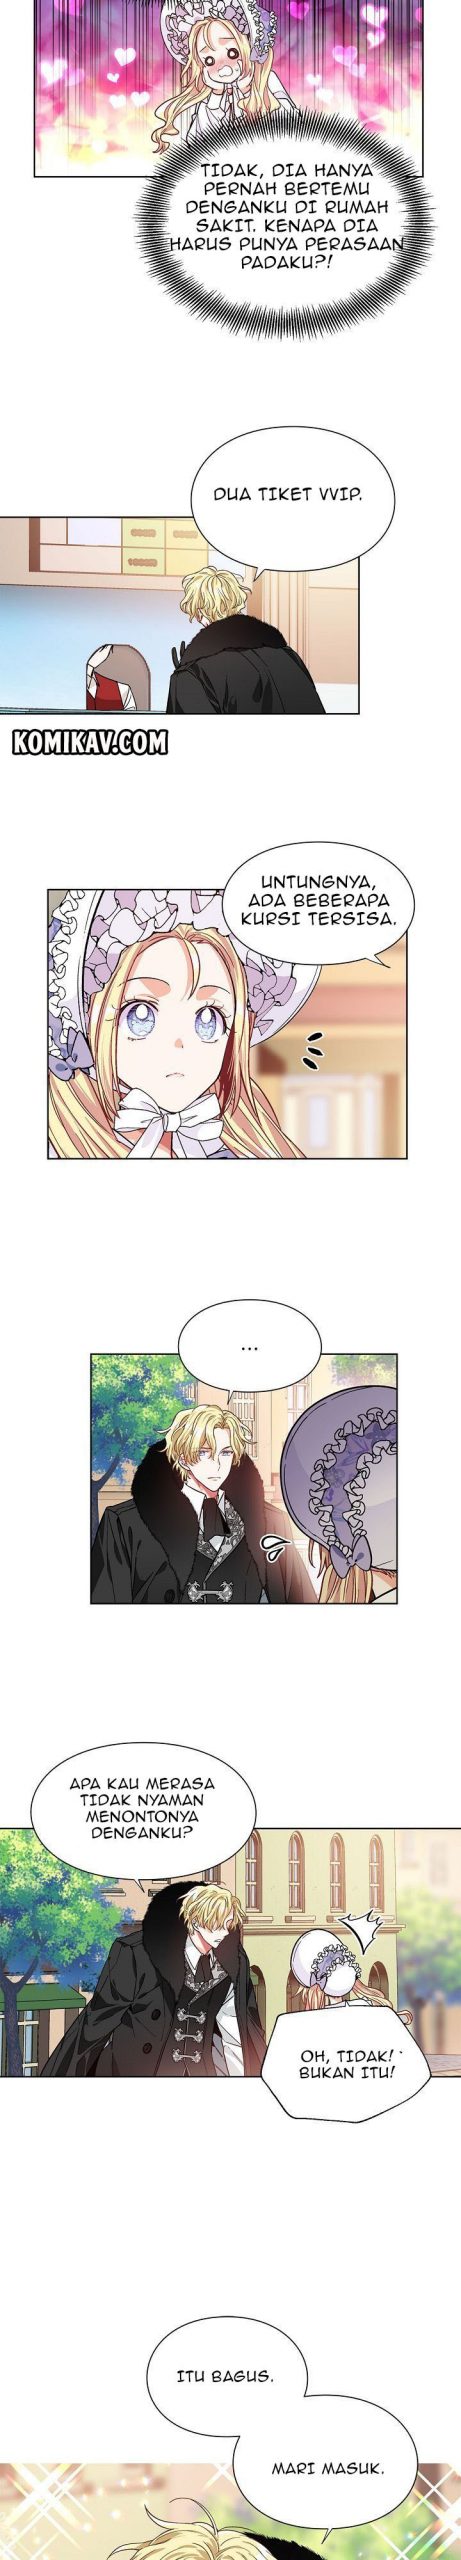 Doctor Elise: The Royal Lady With the Lamp Chapter 40